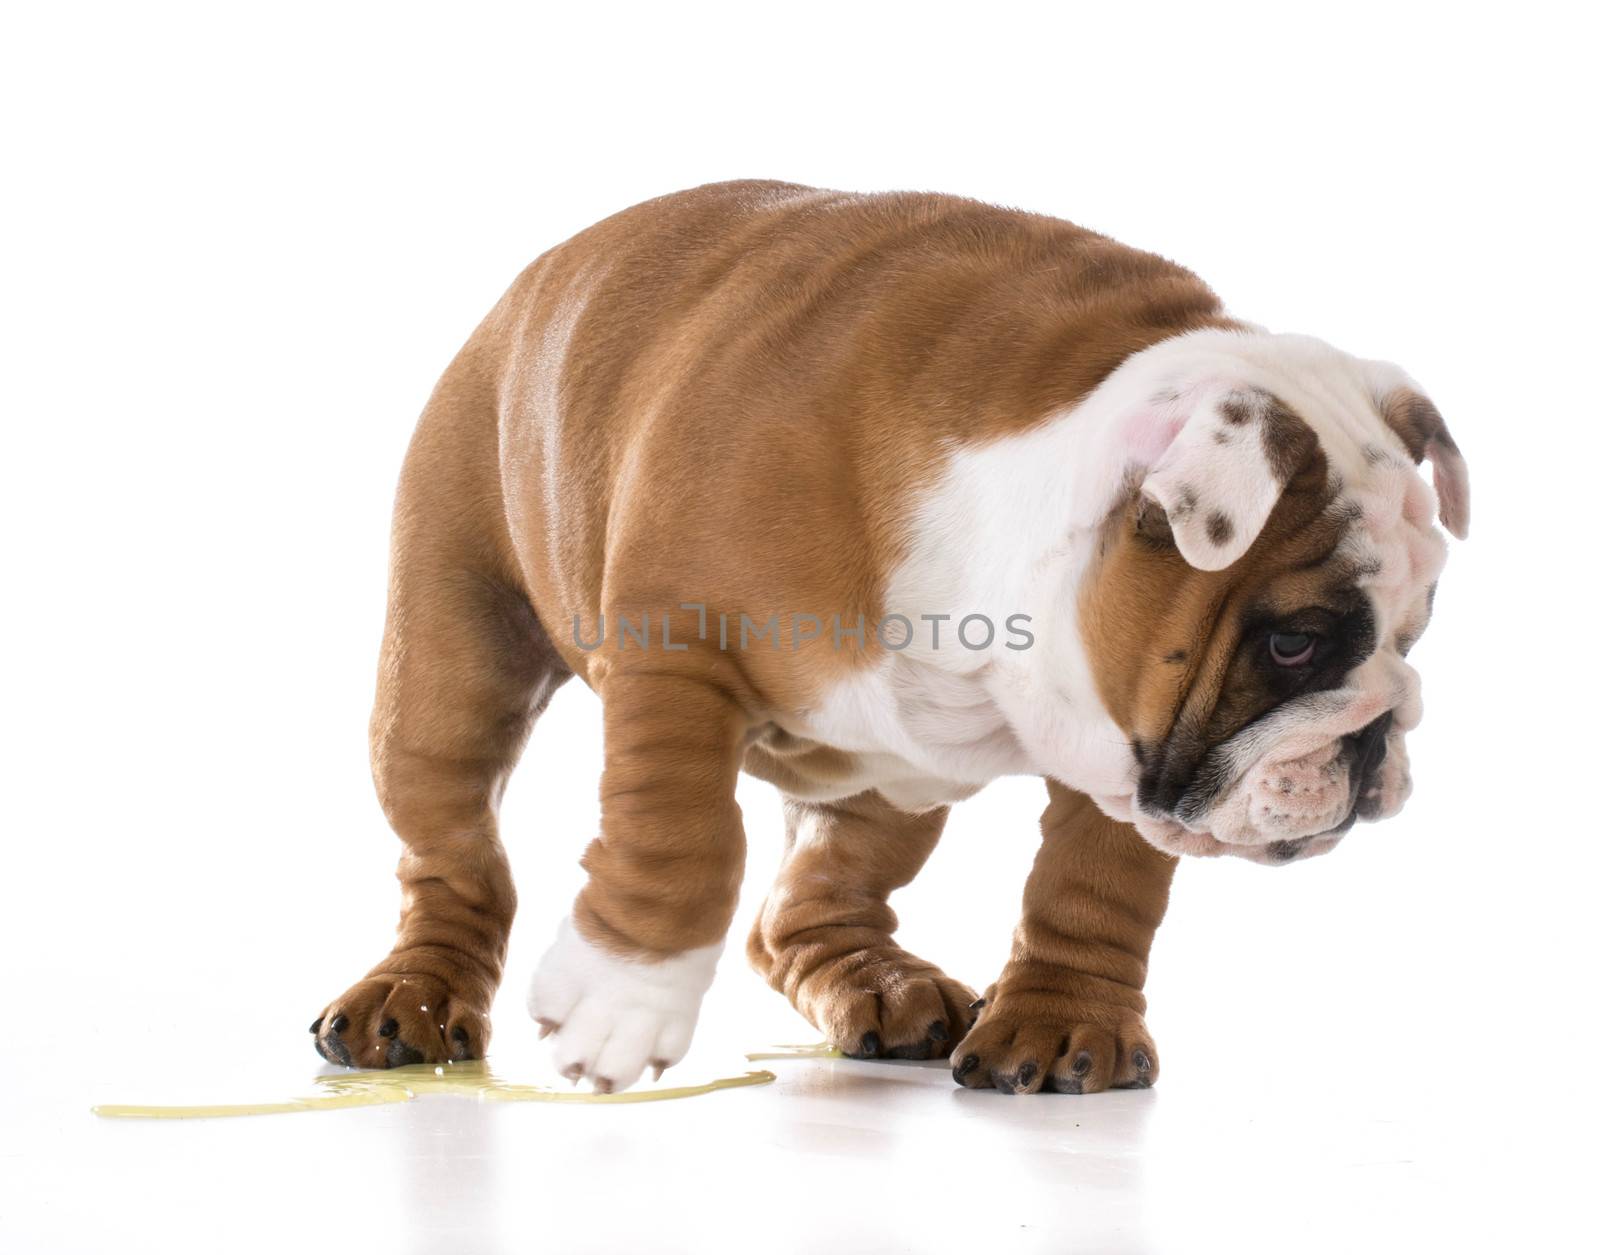 puppy peeing by willeecole123